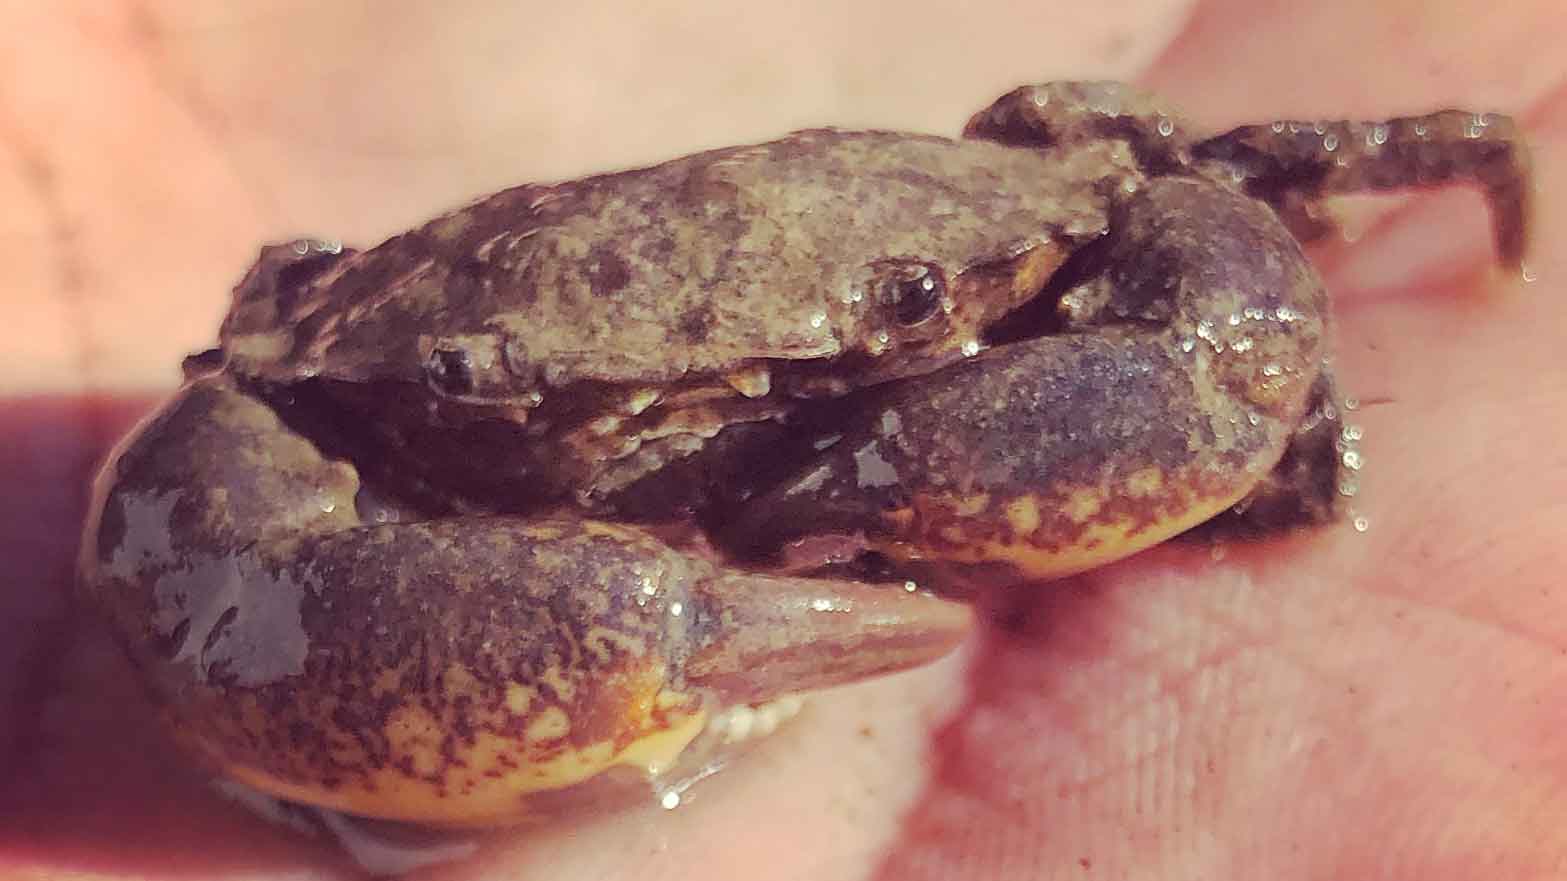 A small Mud Crab in the palm of a hand